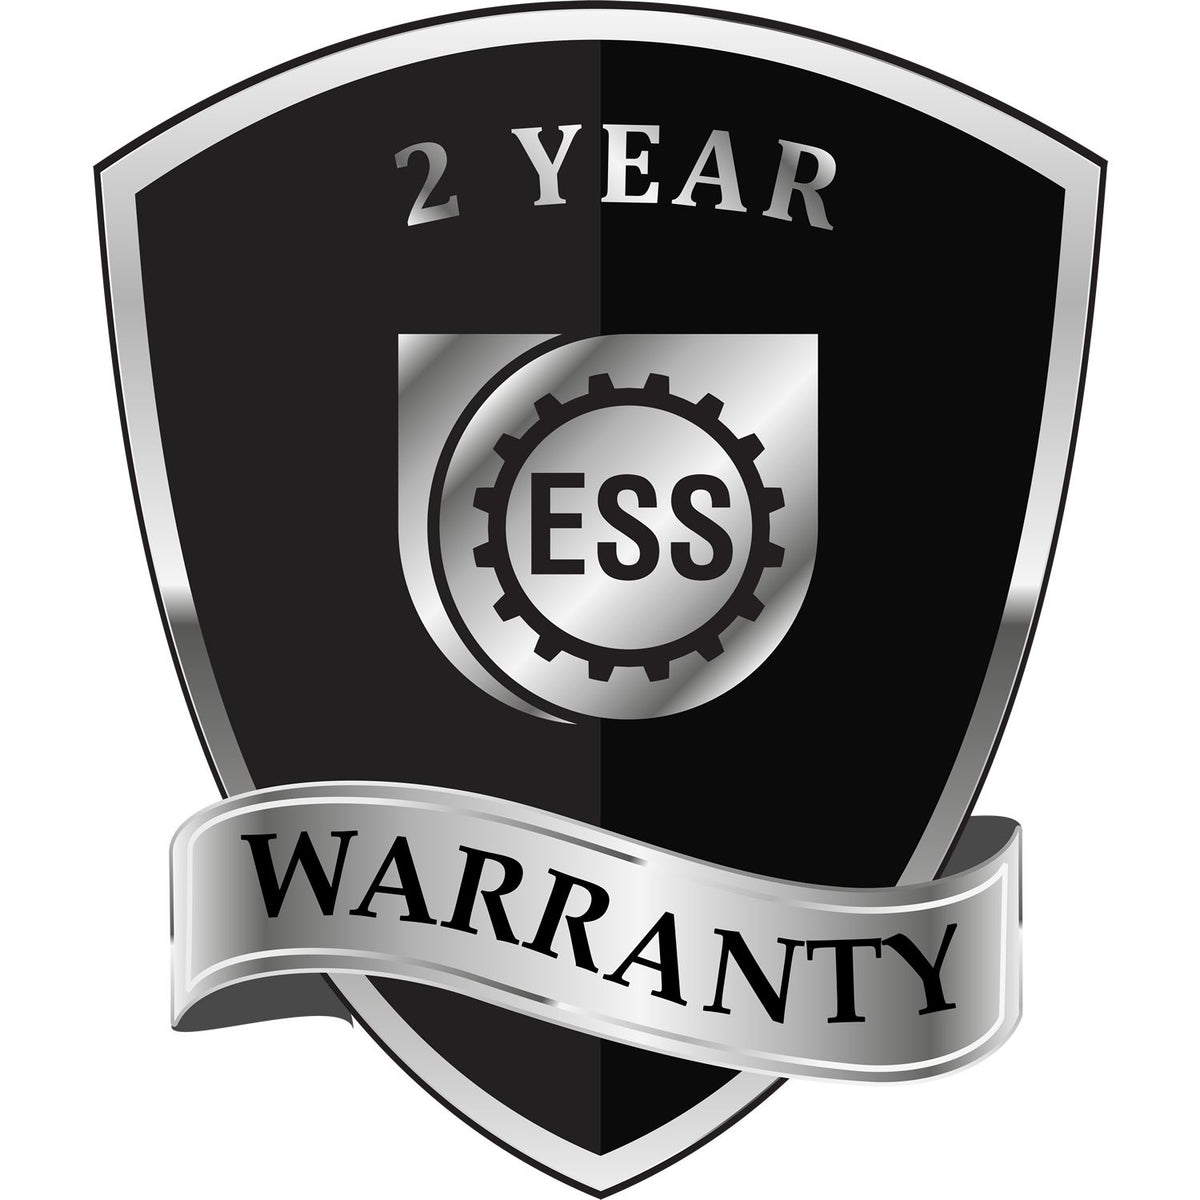 A badge or emblem showing a warranty icon for the Soft Arizona Professional Engineer Seal